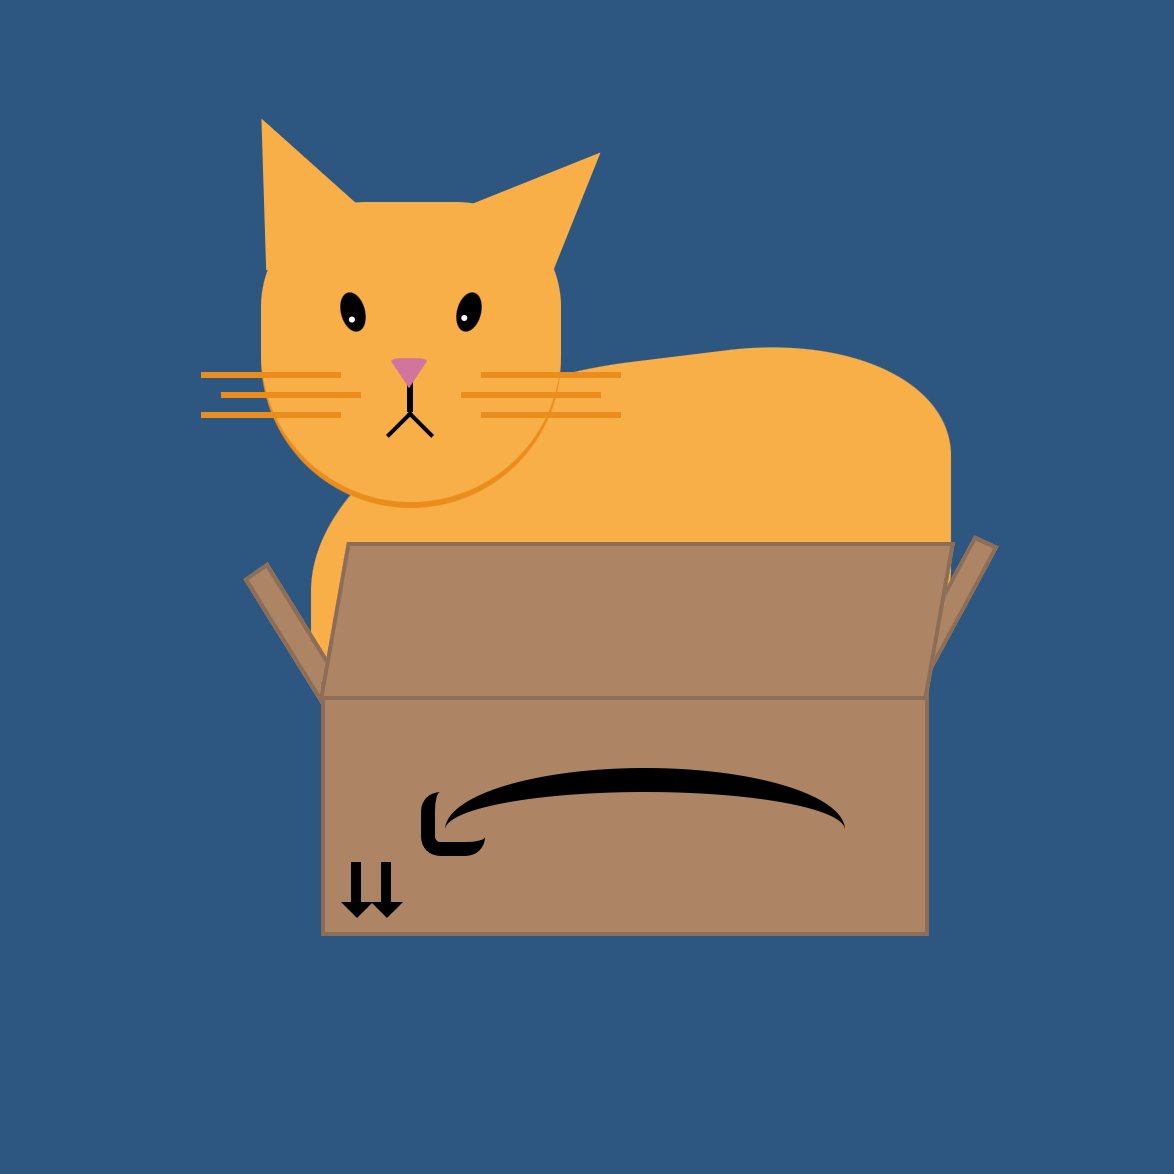 Day 5 - my co-worker shared a pic of his cat squishing into a box, so I immortalised Rupert in CSS. Link to the  @CodePen (in which I overuse `skew`) is here  https://codepen.io/aitchiss/pen/mdeaJOB  #100daysProjectScotland  #100daysProjectScotland2020